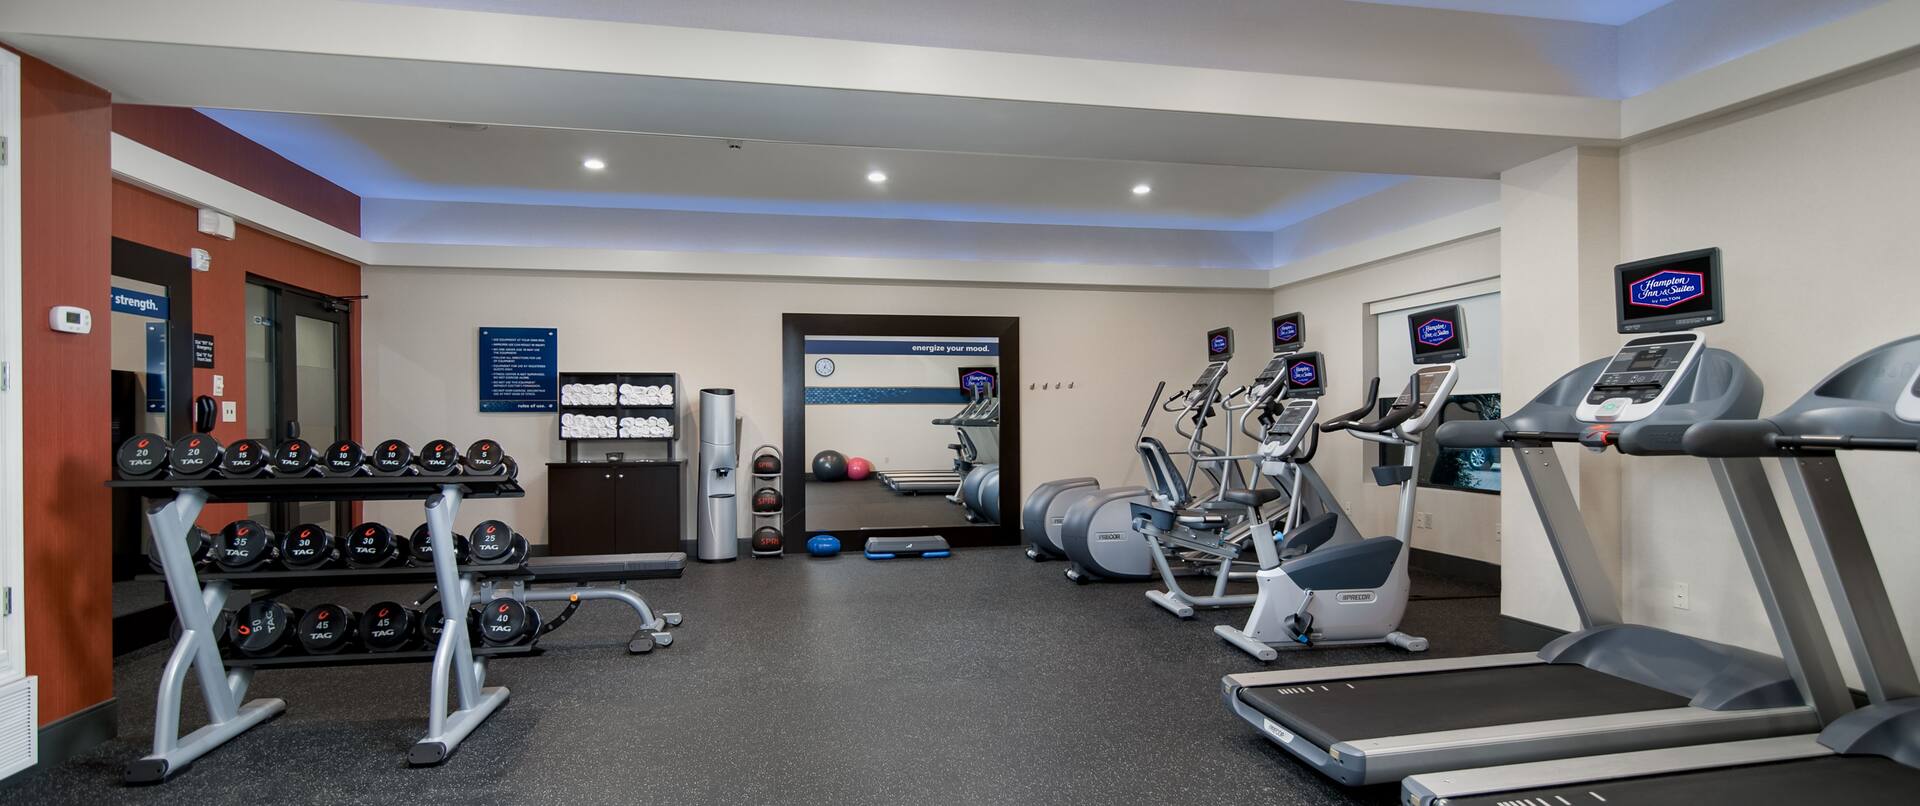 Fitness Center with Treadmills, Cycle Machines, Cross-Trainers and Dumbbell Rack